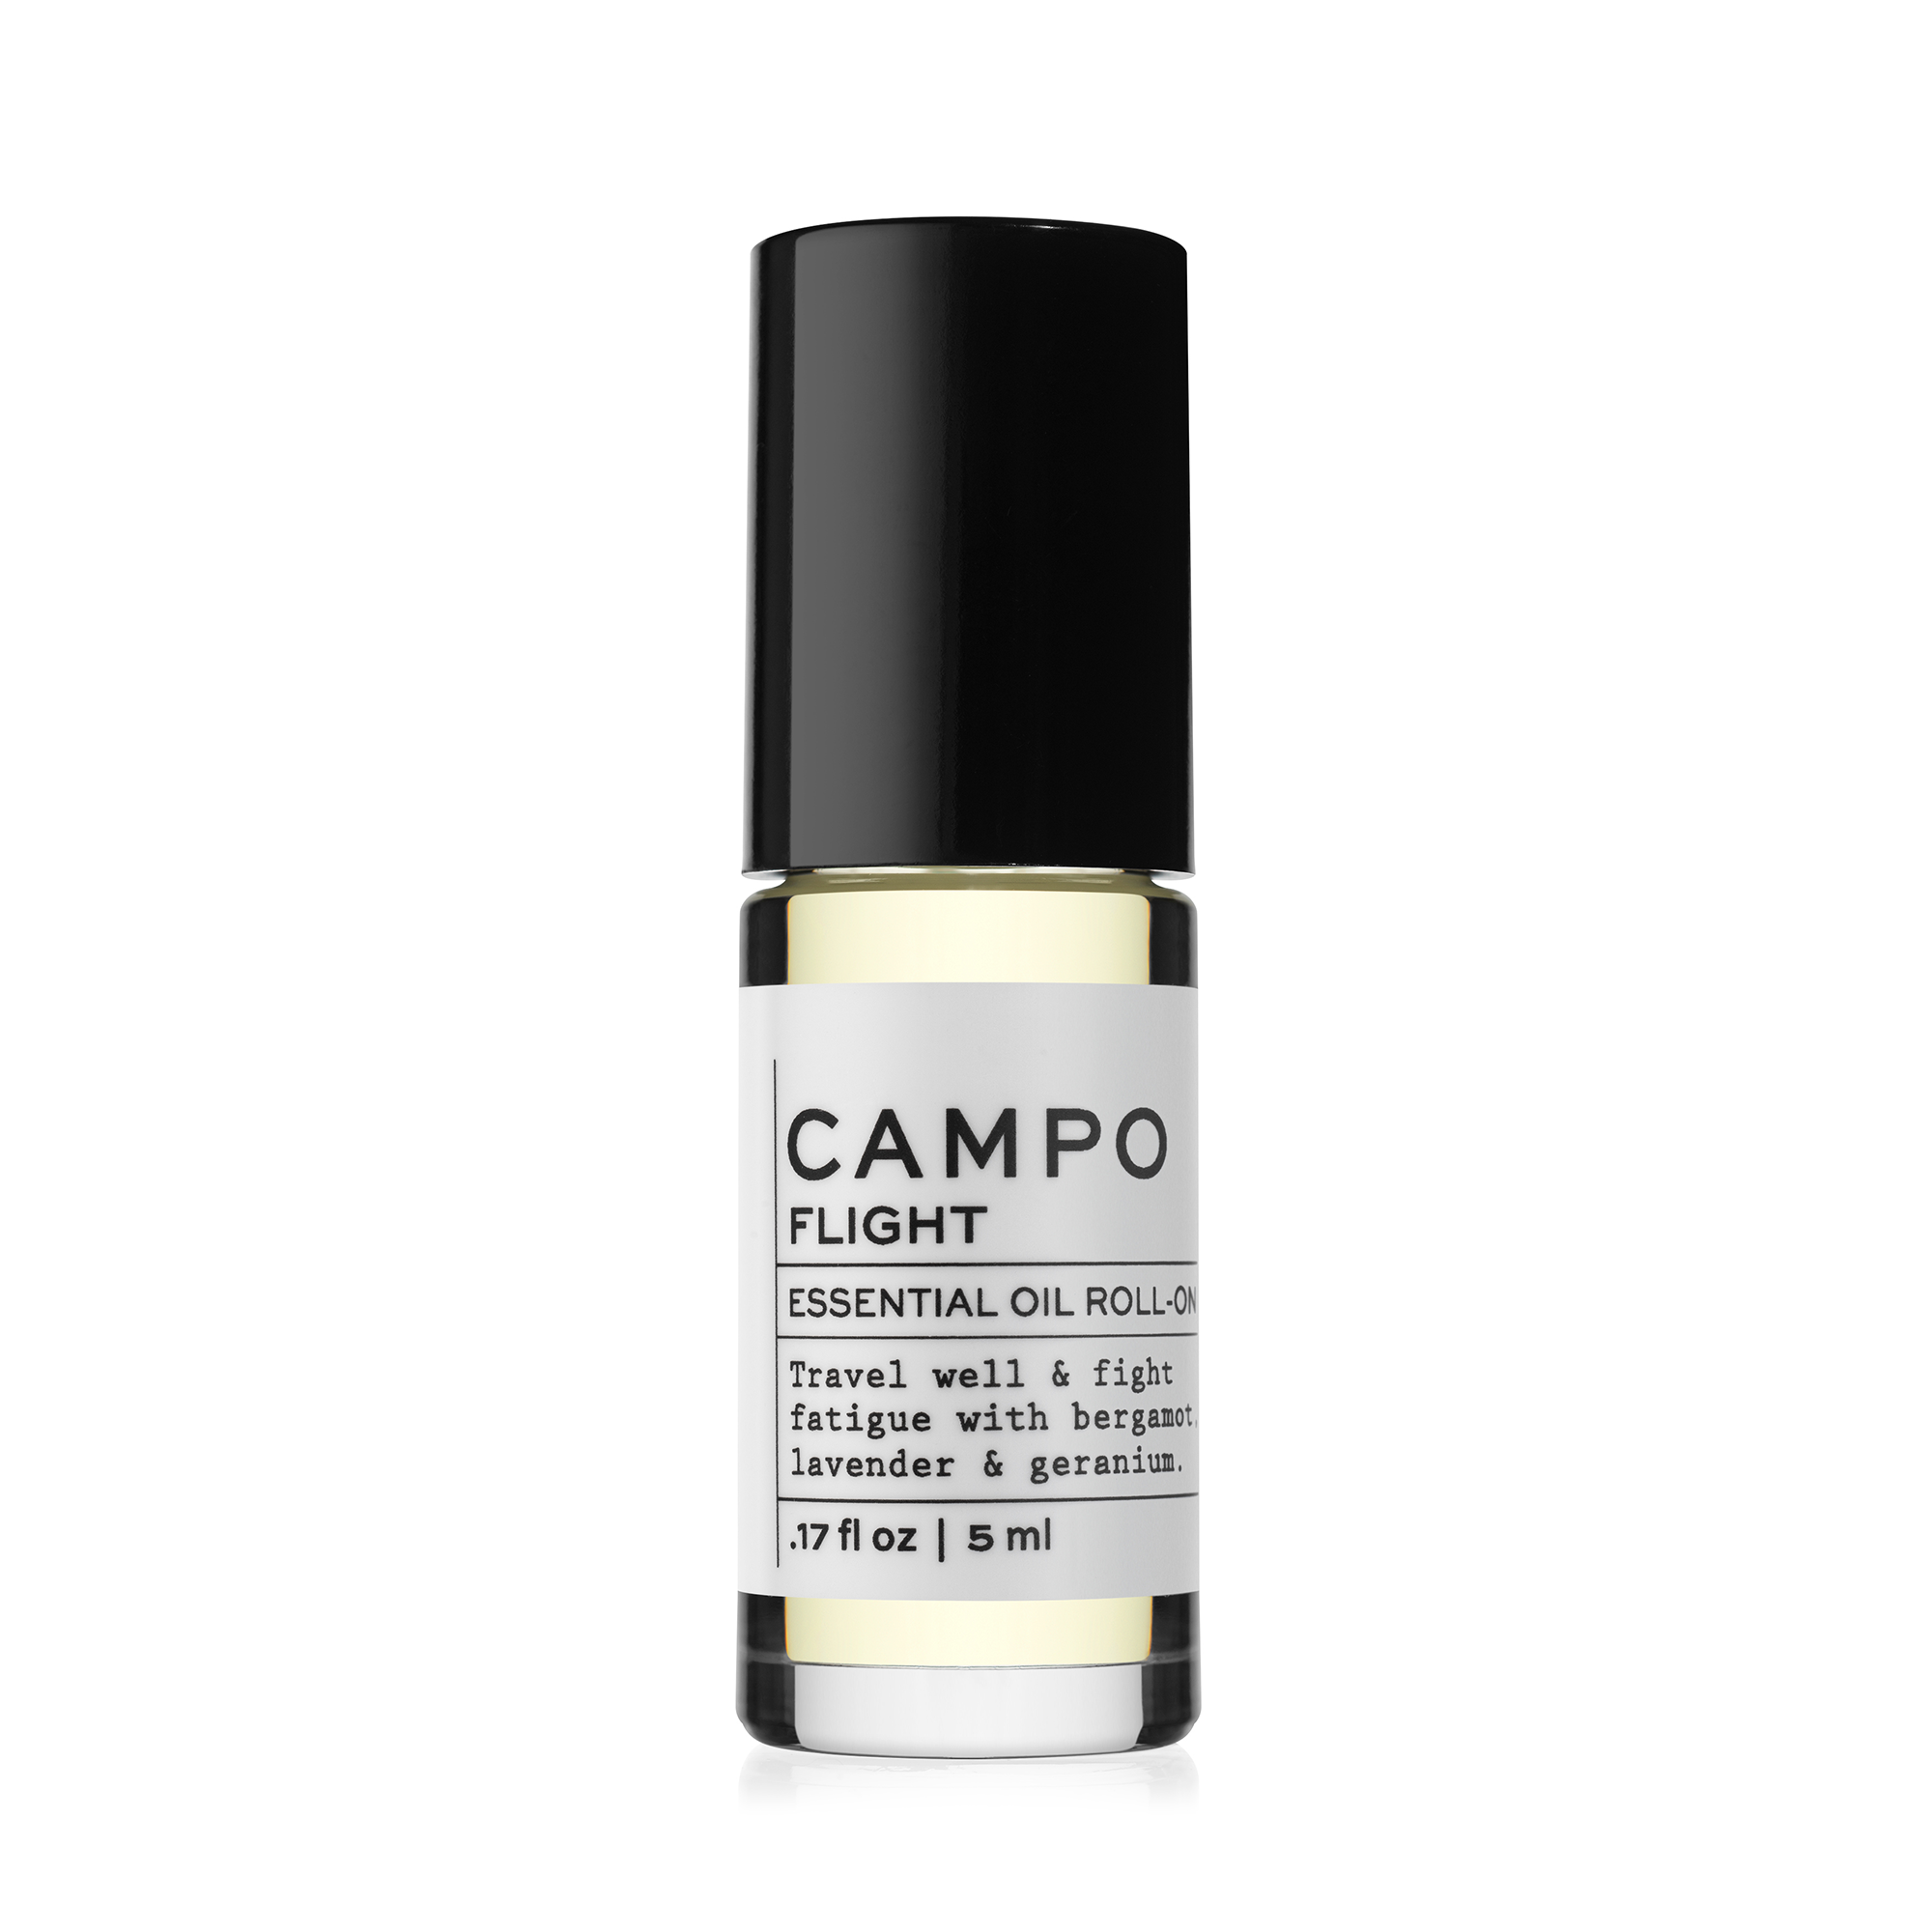 A calming blend of essential oils crafted to ease pre-flight nerves and provide relaxation during air travel. Packed in 5 ml, portable roll-on bottle.